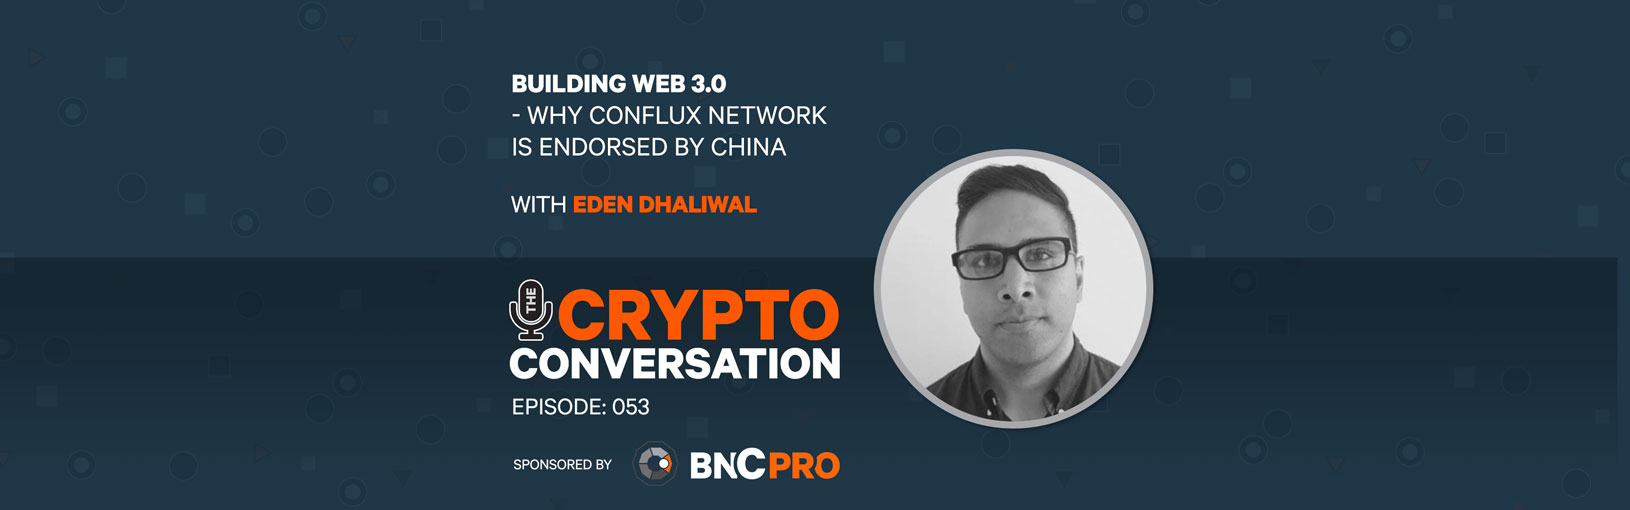 Building Web 3.0 – Why Conflux Network is endorsed by China